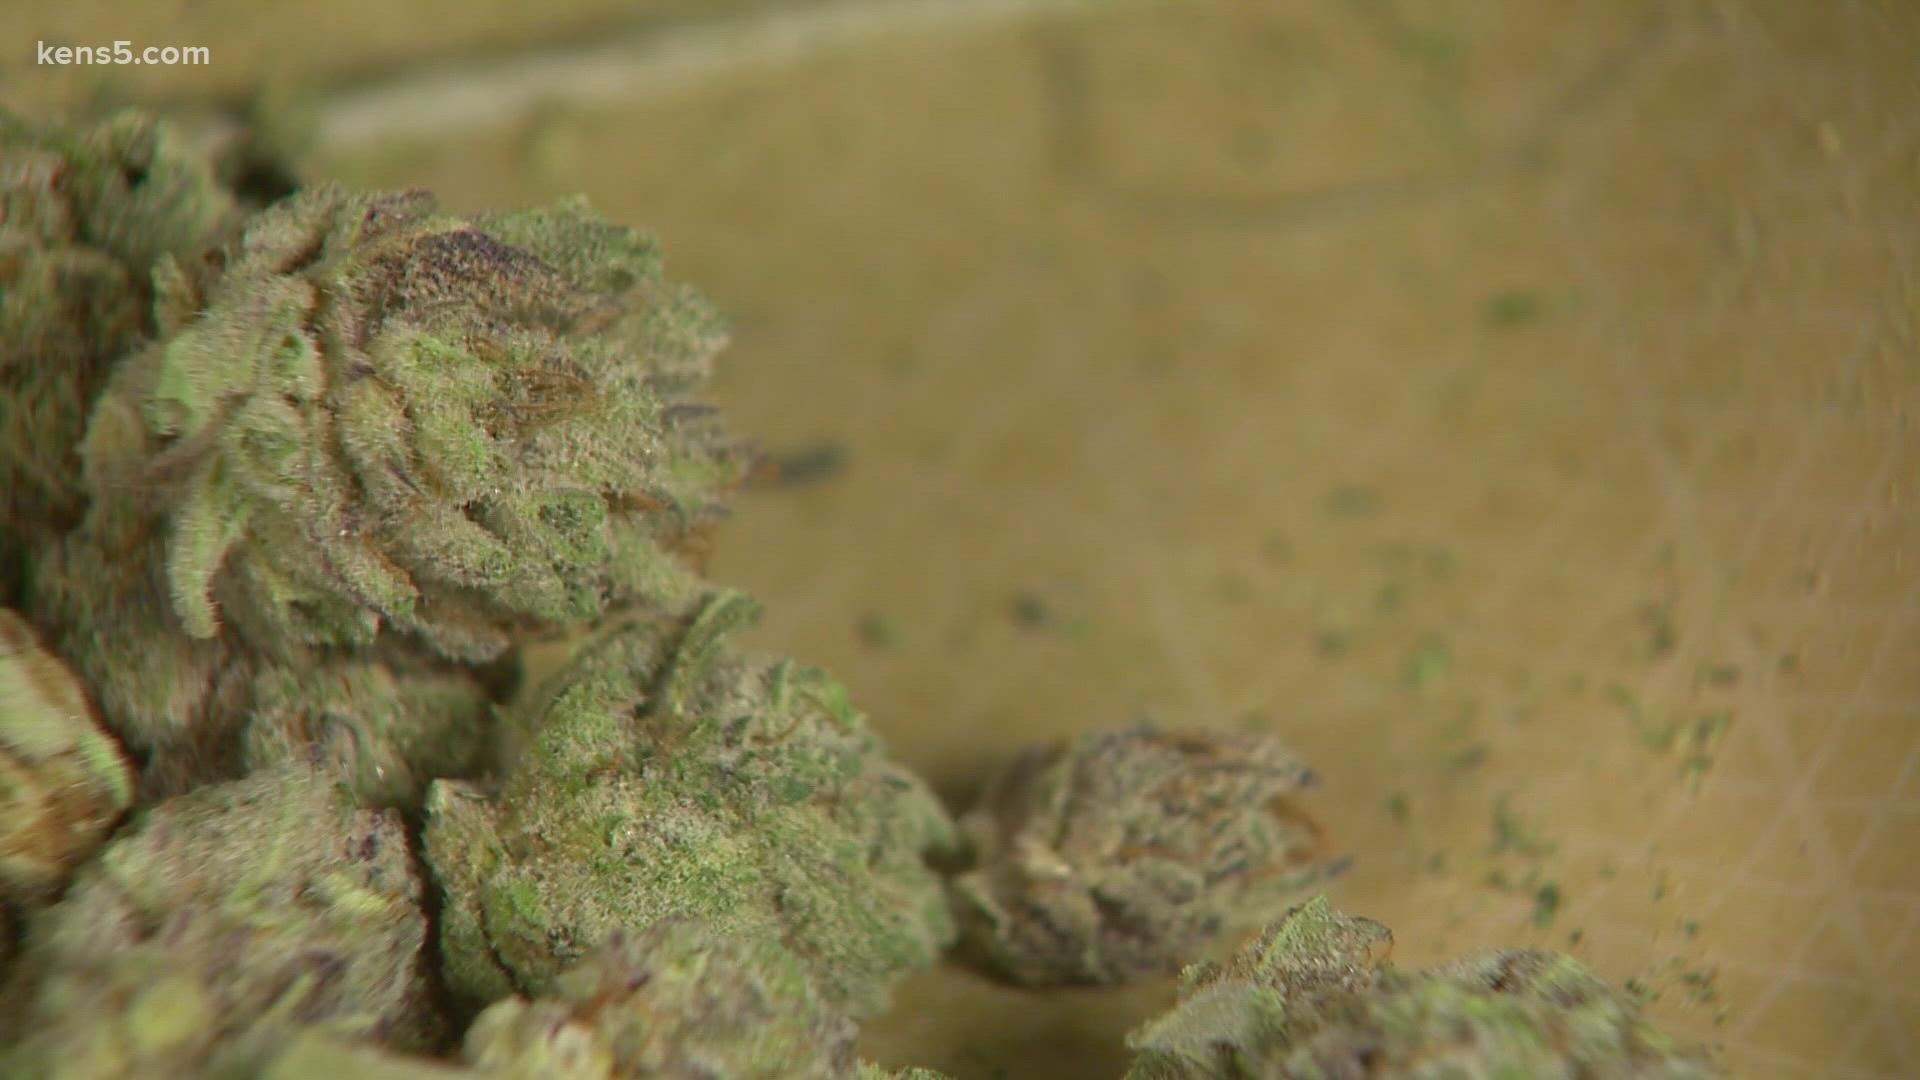 A local activist group has made inroads to combatting what they believe are overly strict marijuana laws.